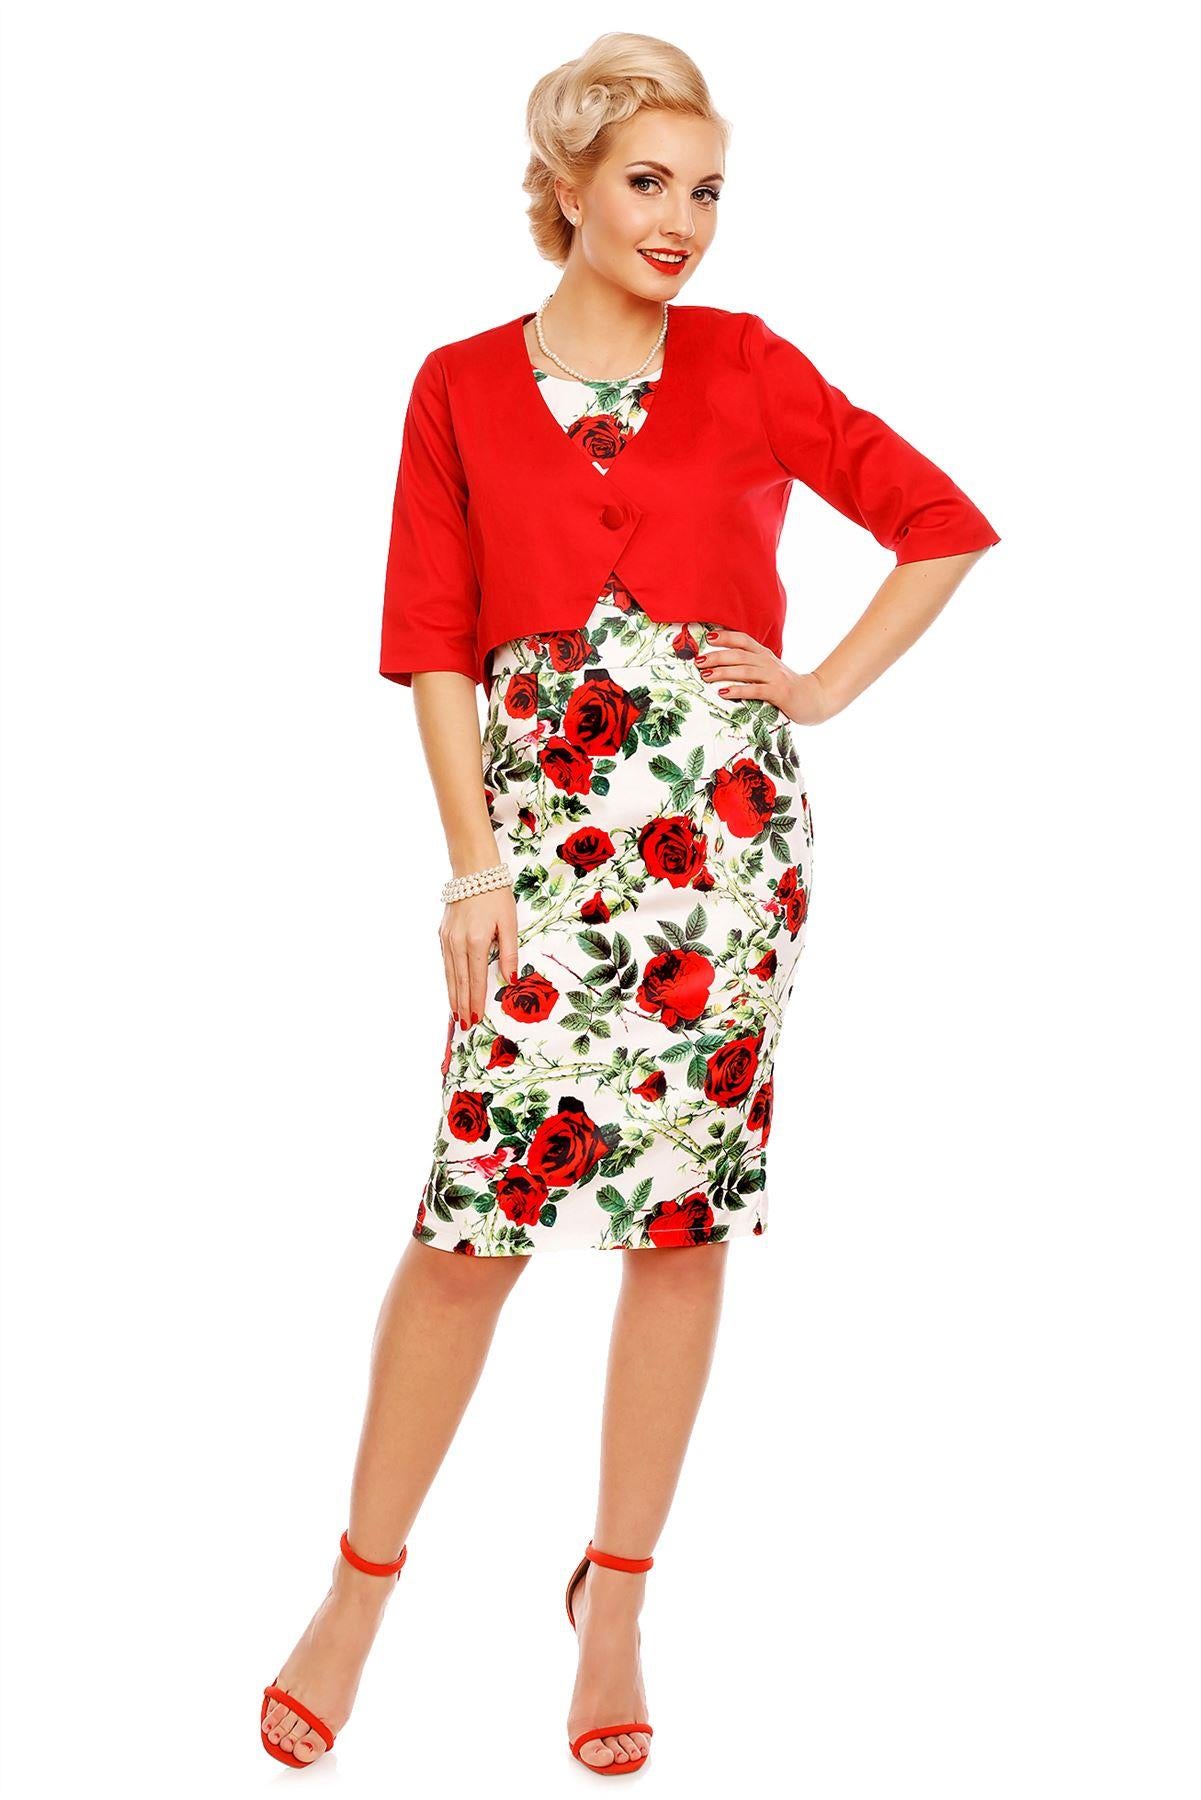 Model wearing our Naomi Floral Rose Wiggle Dress in White/Red, with red jacket, front view